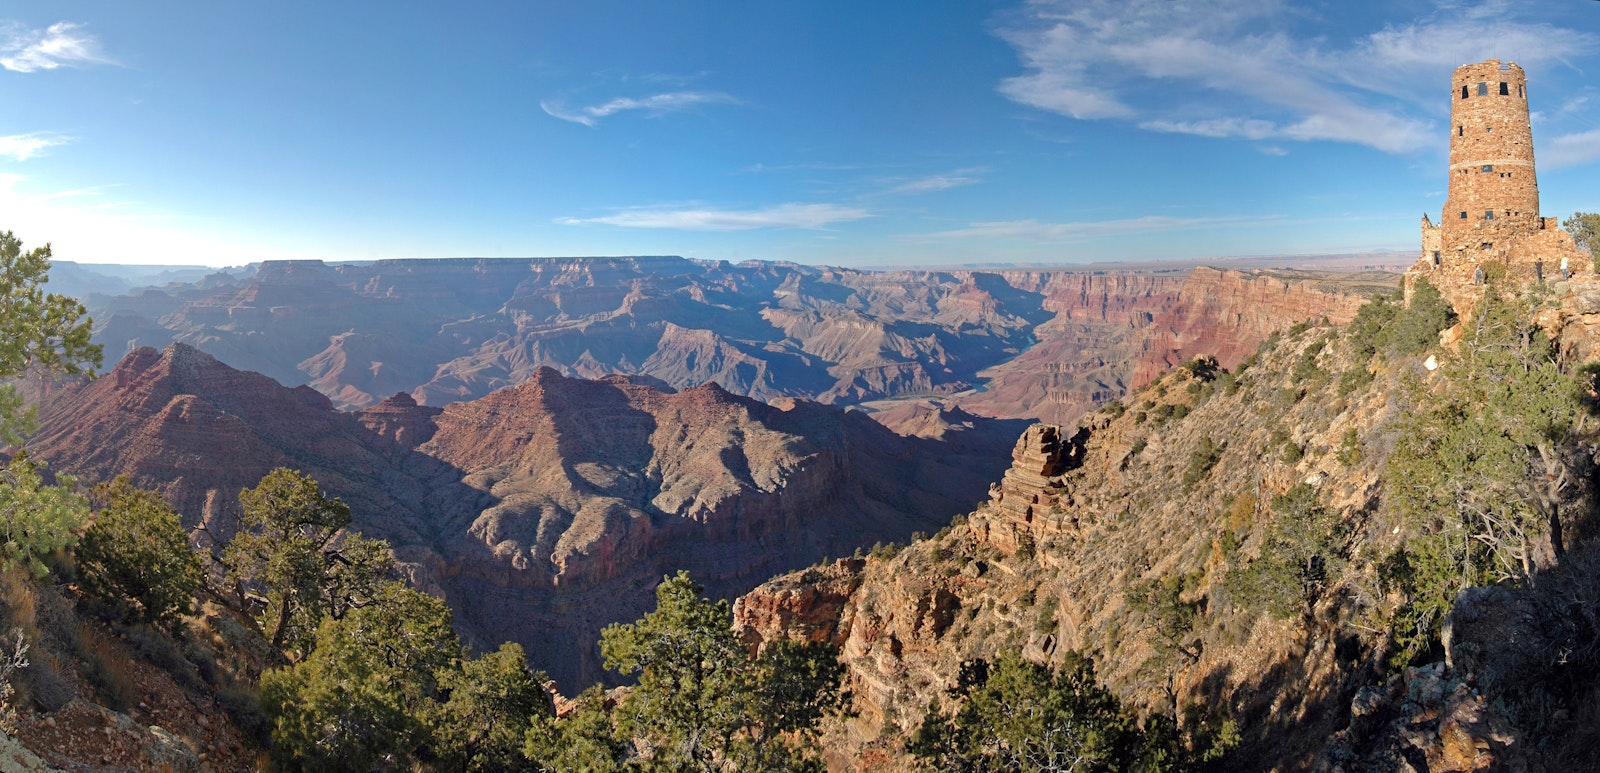 scenic overlook into a large canyon. on the right, a stone watchtower